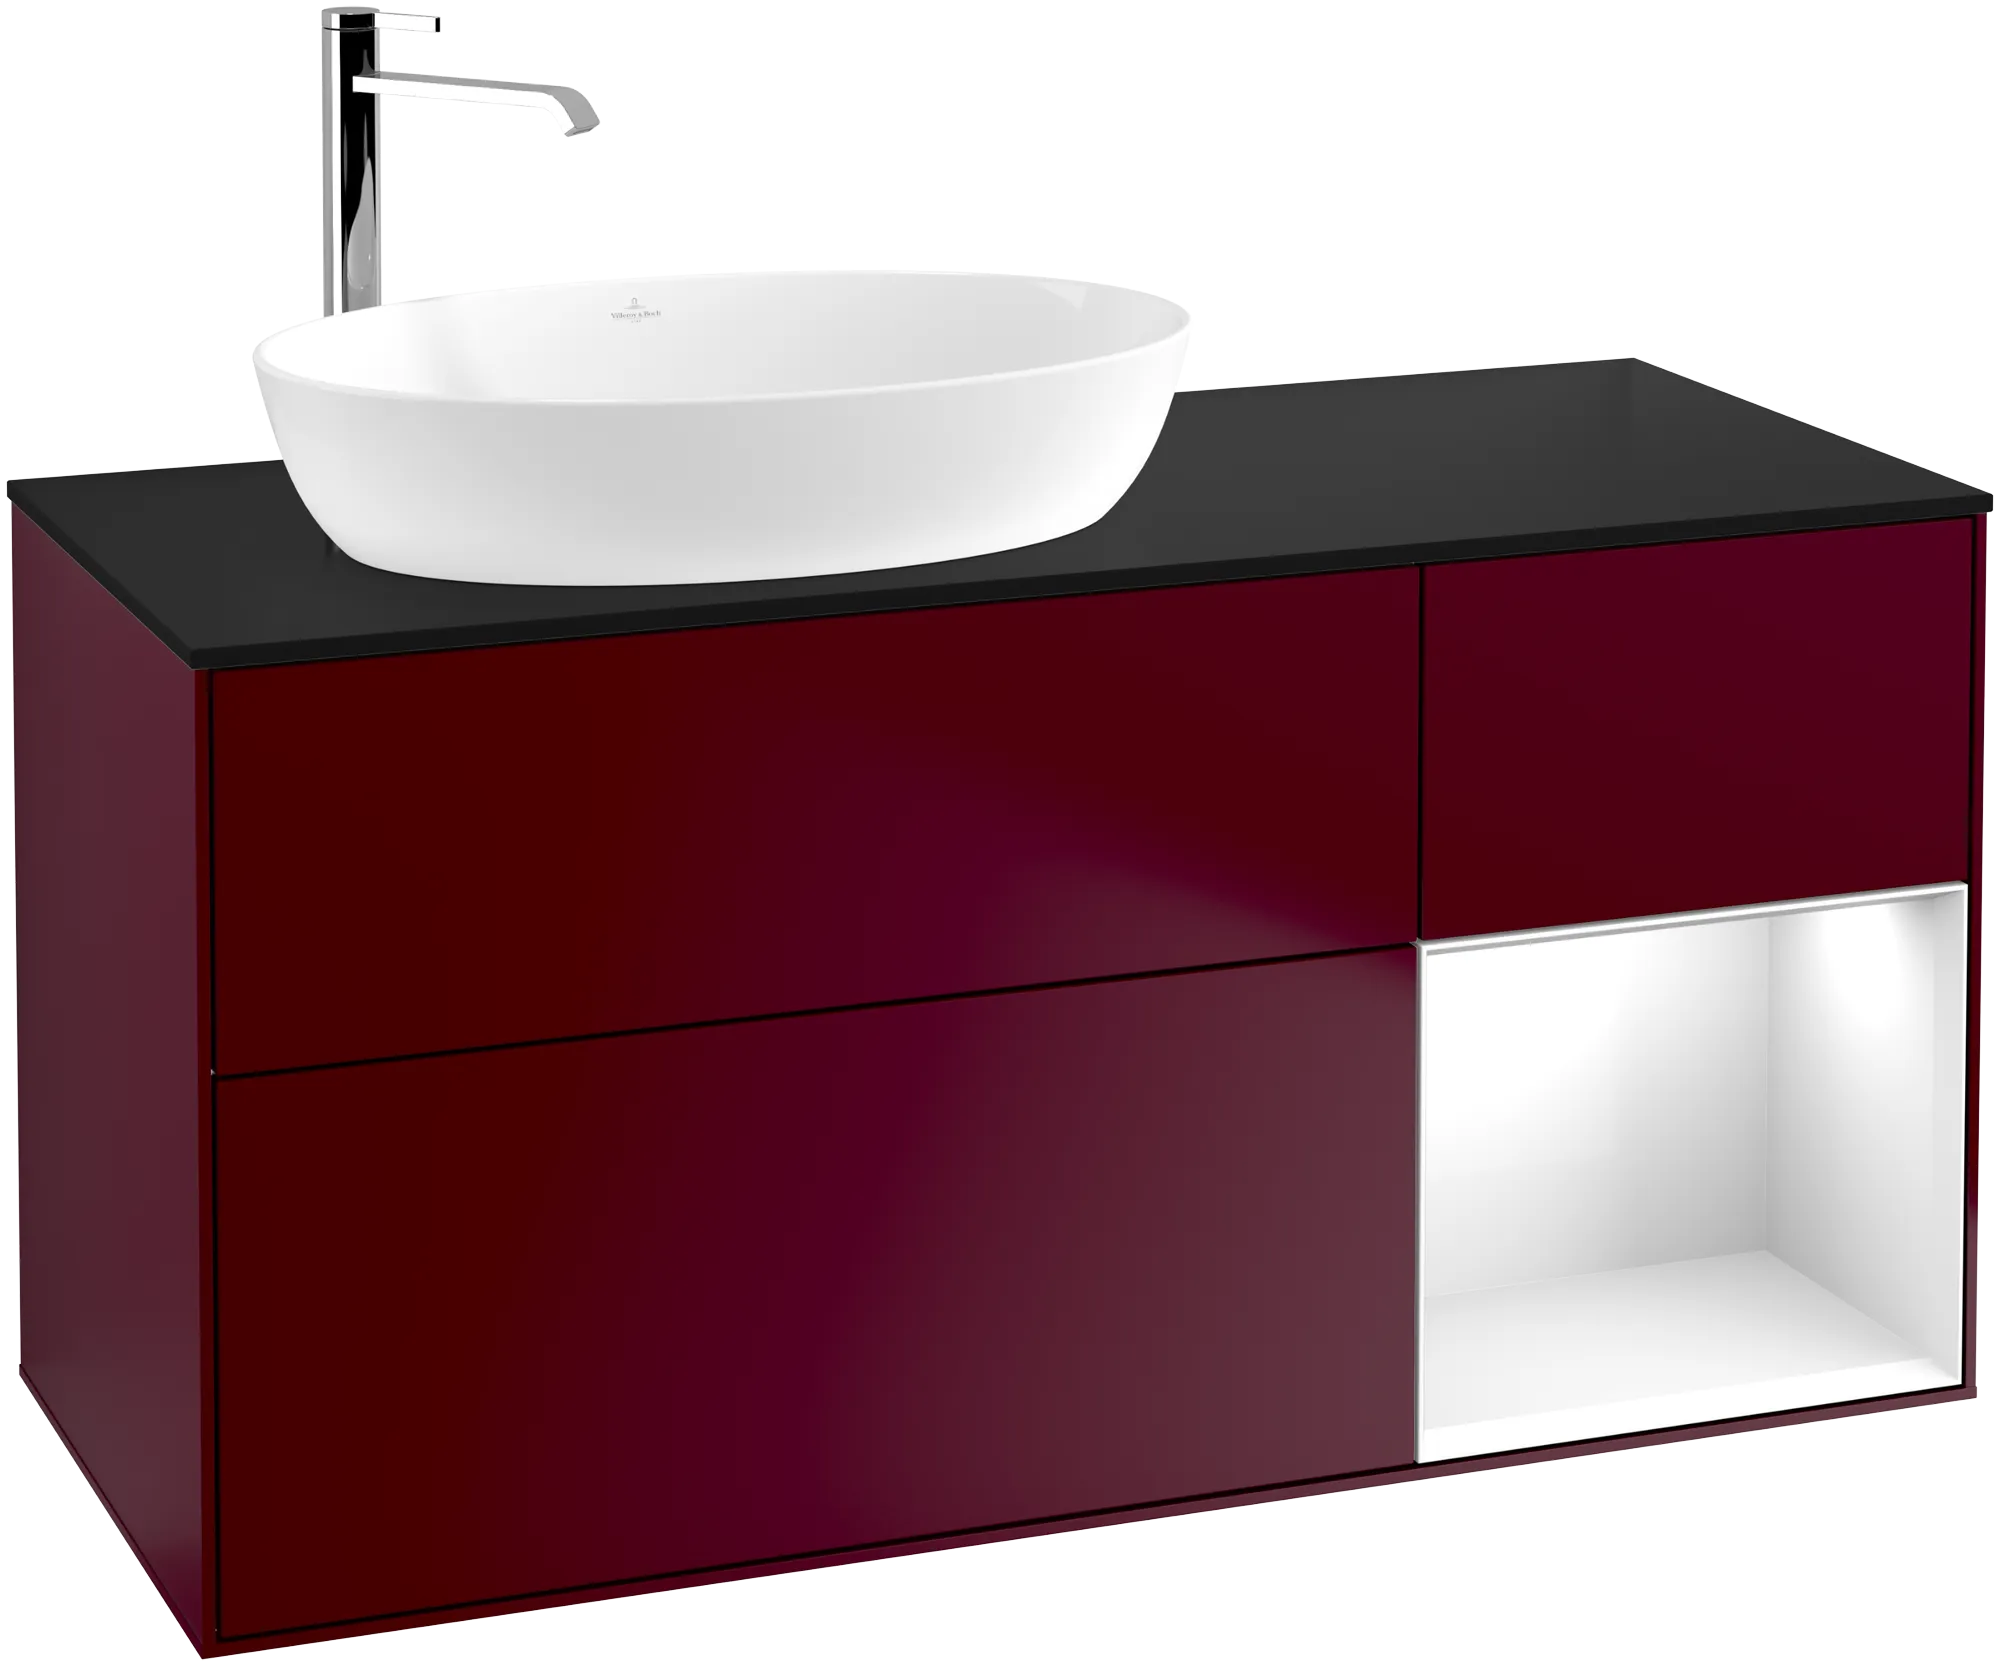 VILLEROY BOCH Finion Vanity unit, with lighting, 3 pull-out compartments, 1200 x 603 x 501 mm, Peony Matt Lacquer / Glossy White Lacquer / Glass Black Matt #G932GFHB resmi